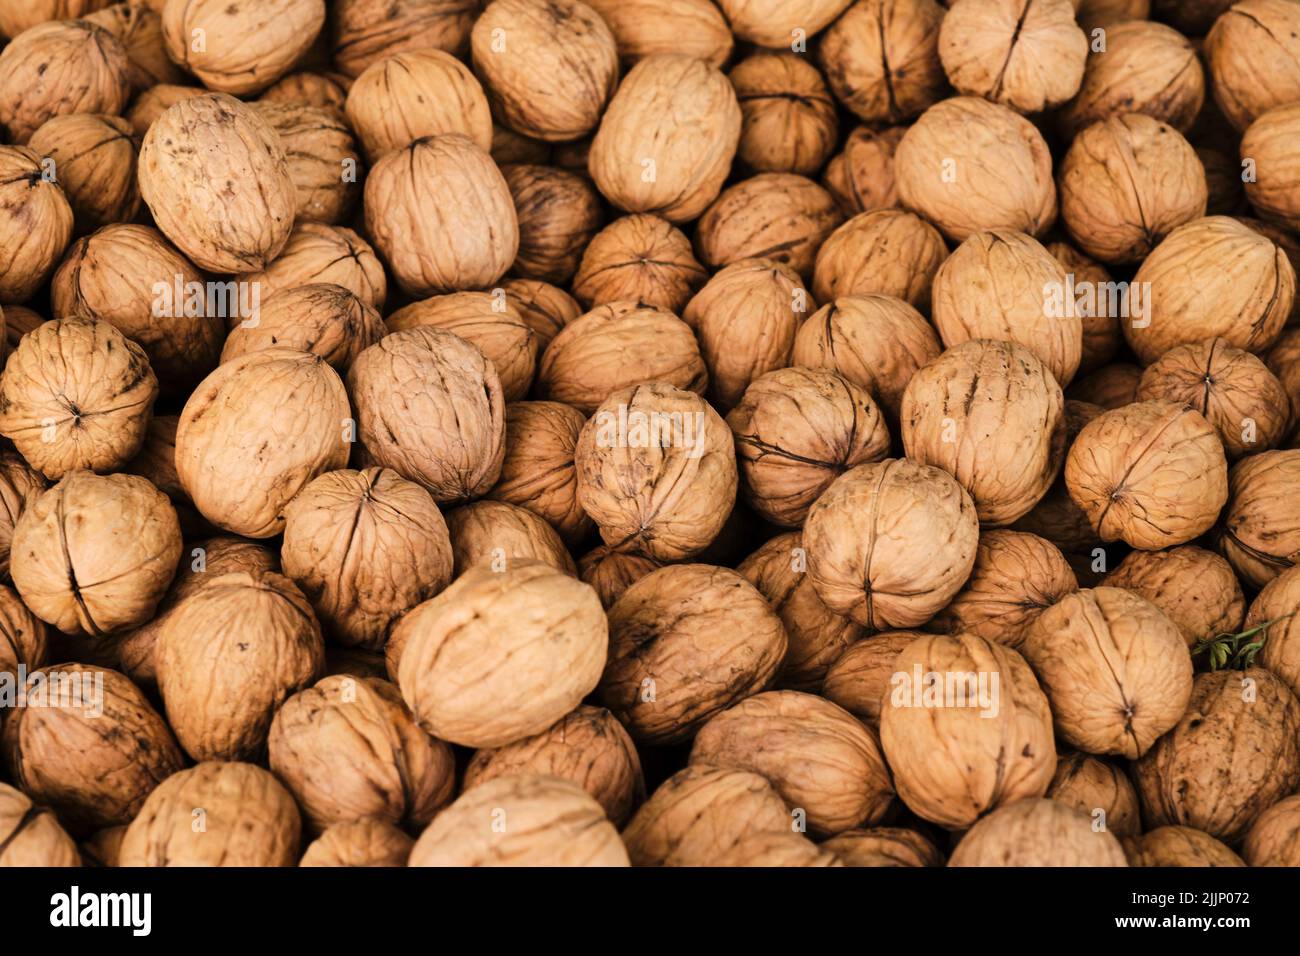 Top view of full frame background of dried walnuts in shell placed on counter at local market Stock Photo